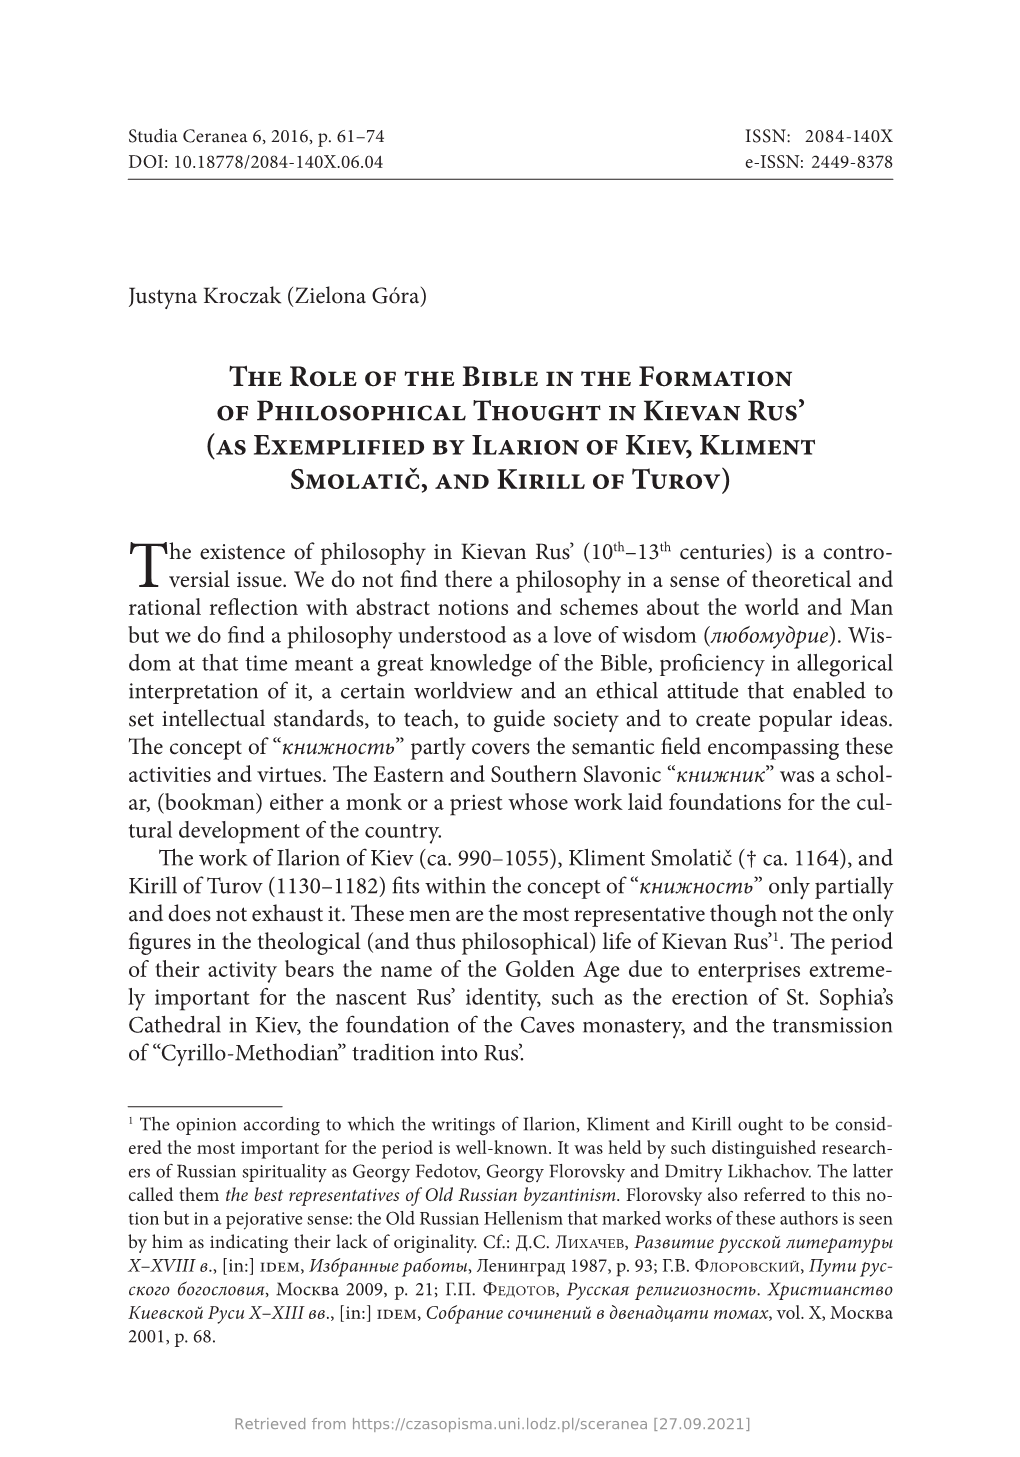 The Role of the Bible in the Formation of Philosophical Thought in Kievan Rus’ (As Exemplified by Ilarion of Kiev, Kliment Smolatič, and Kirill of Turov)